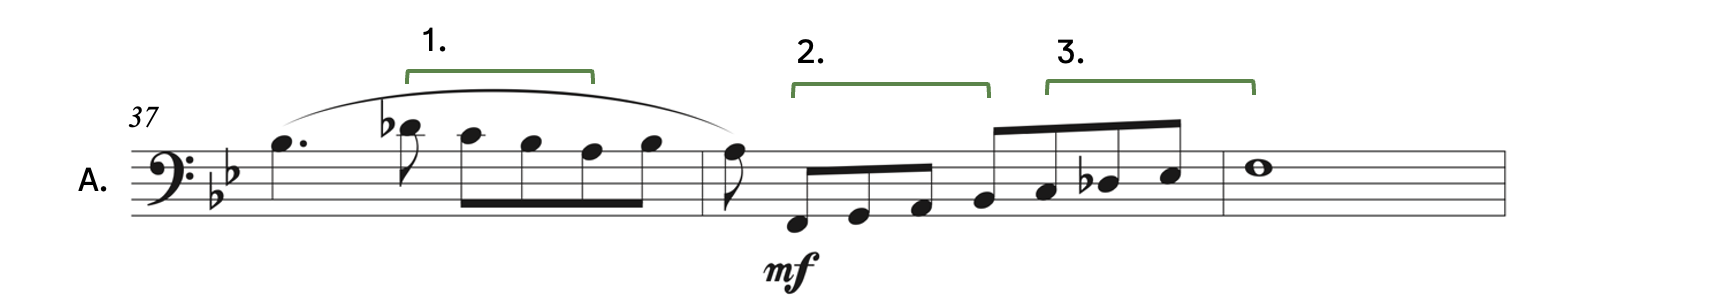 Farrenc, Cello Sonata, op. 46, first movement - Allegro moderato. Number 1 points to the pitches D-flat, C, B-flat, A. Number 2 points to the pitches F, G, A, B-flat. Number 3 points to the pitches C, D-flat, E-flat, F.